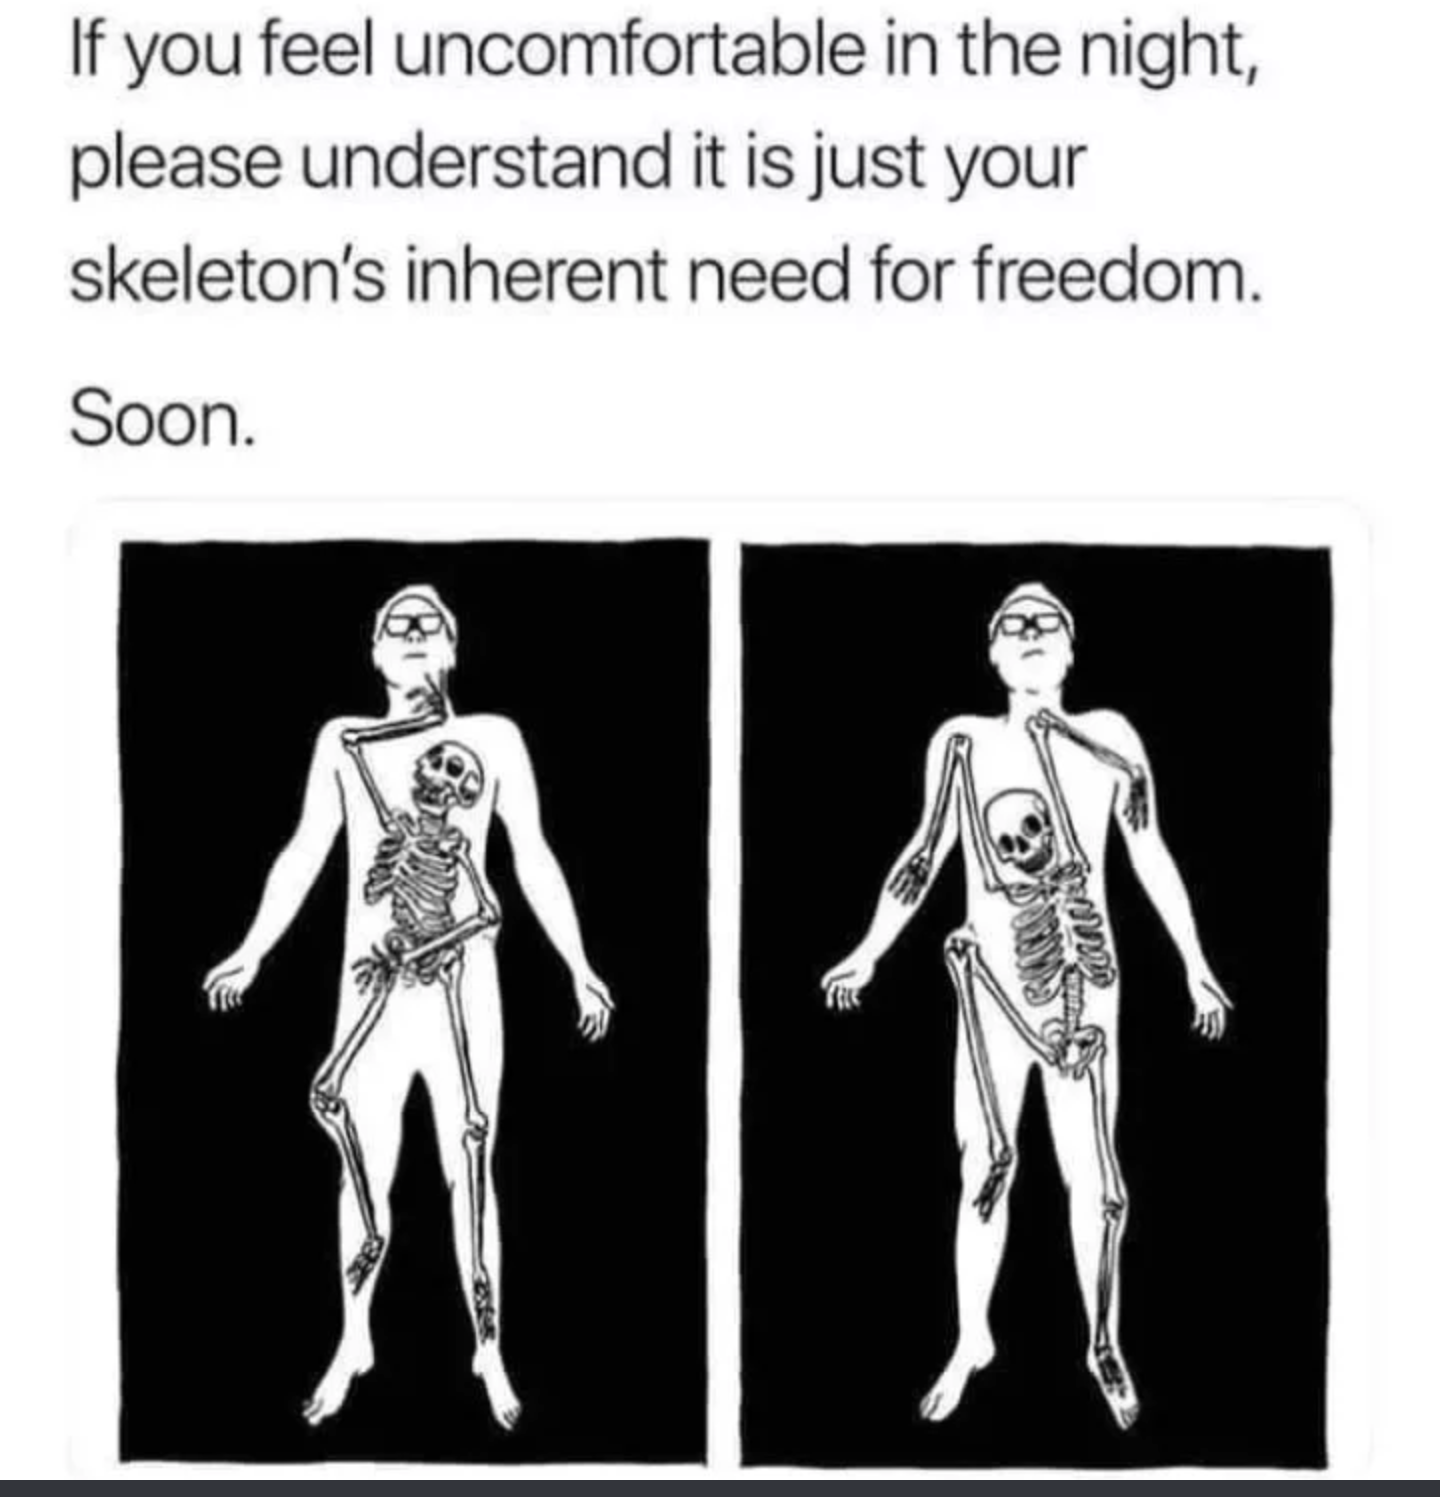 skeleton memes - If you feel uncomfortable in the night, please understand it is just your skeleton's inherent need for freedom. Soon.